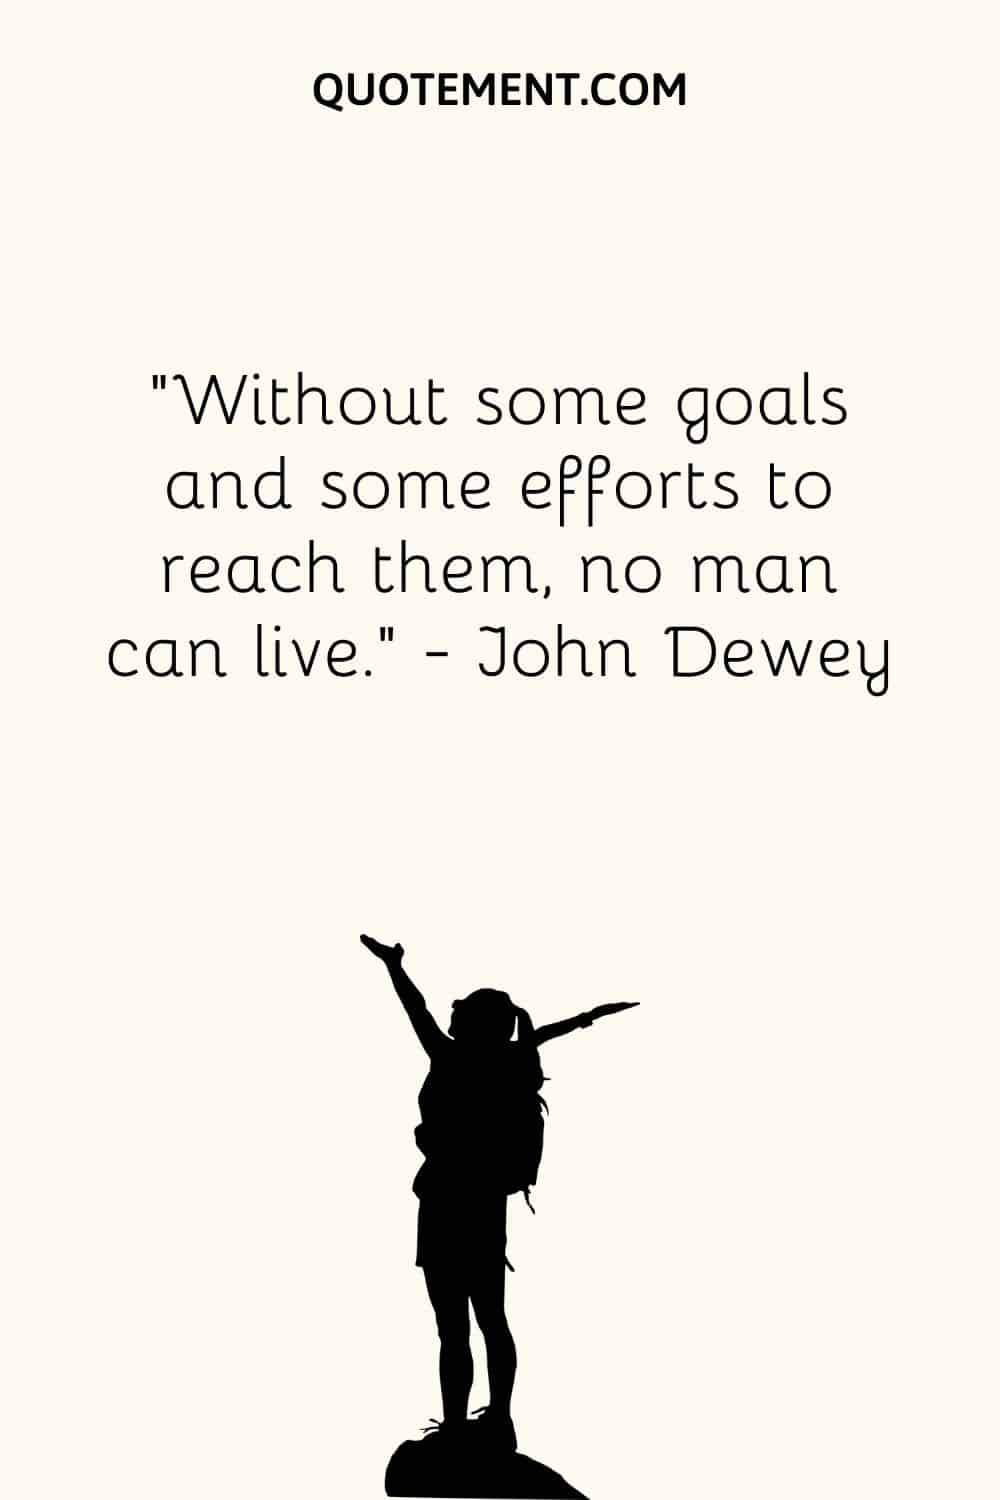 Without some goals and some efforts to reach them, no man can live